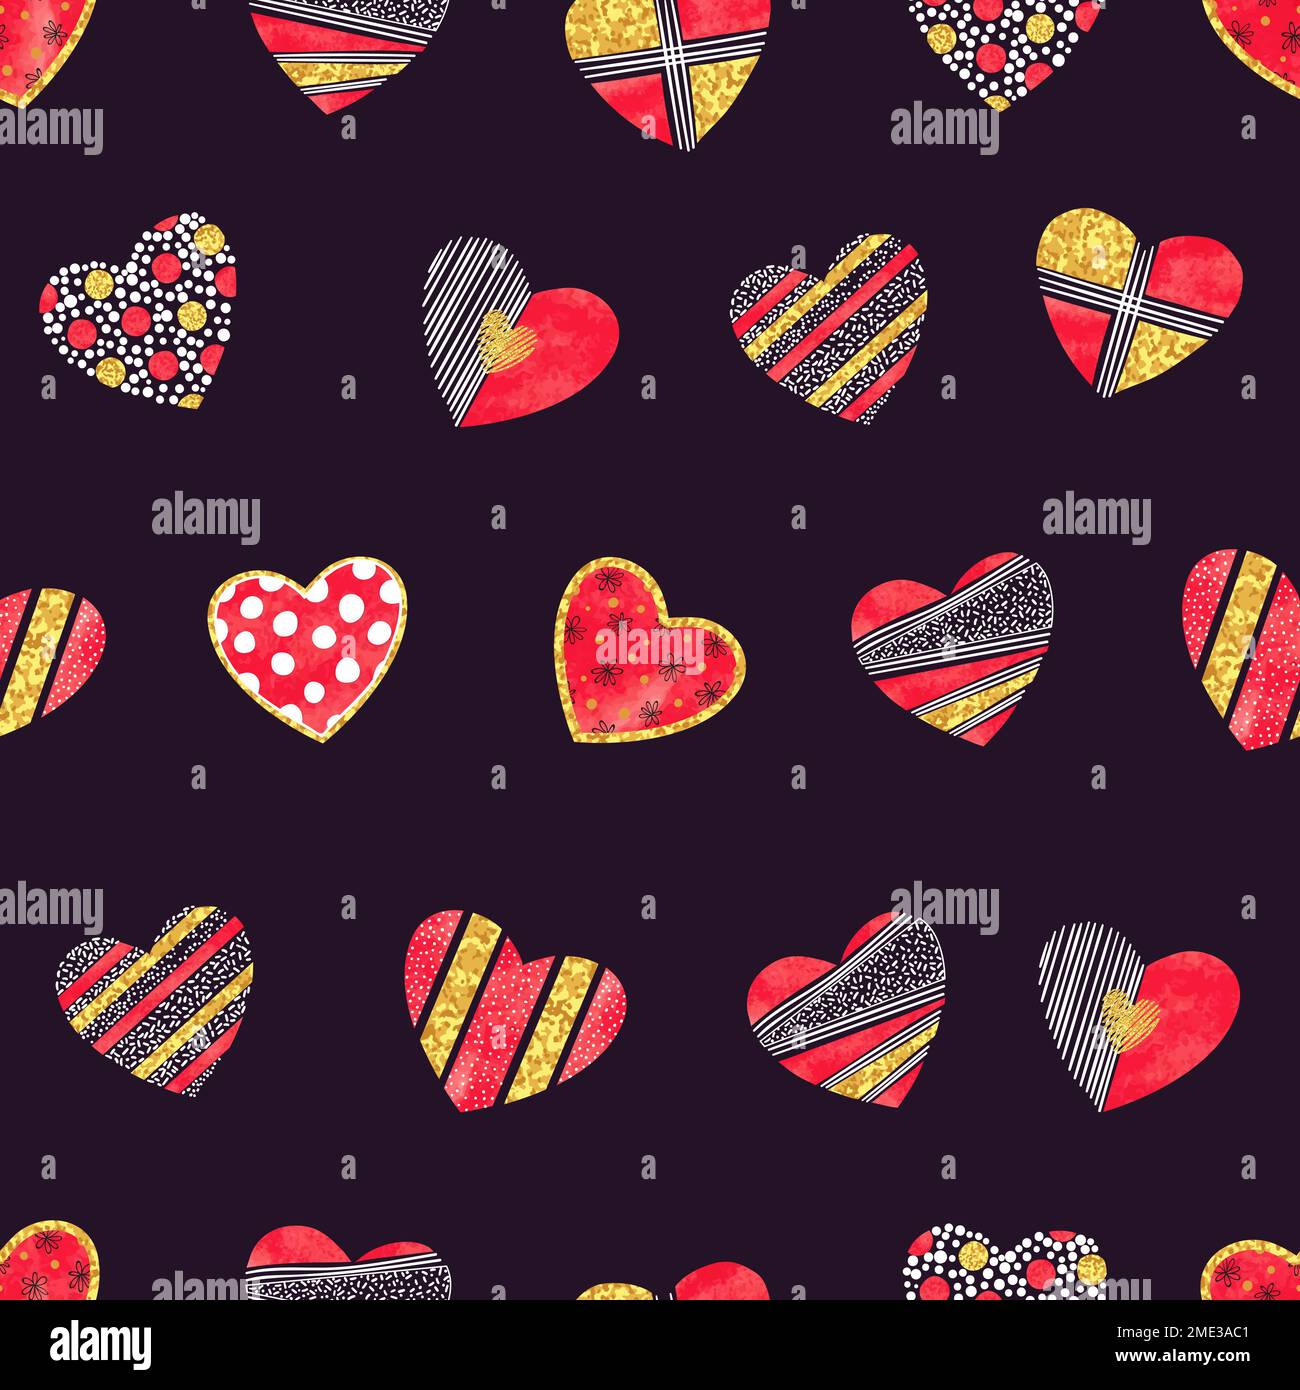 Valentines day background with patterned hearts. Vector romantic seamless pattern. Stock Vector